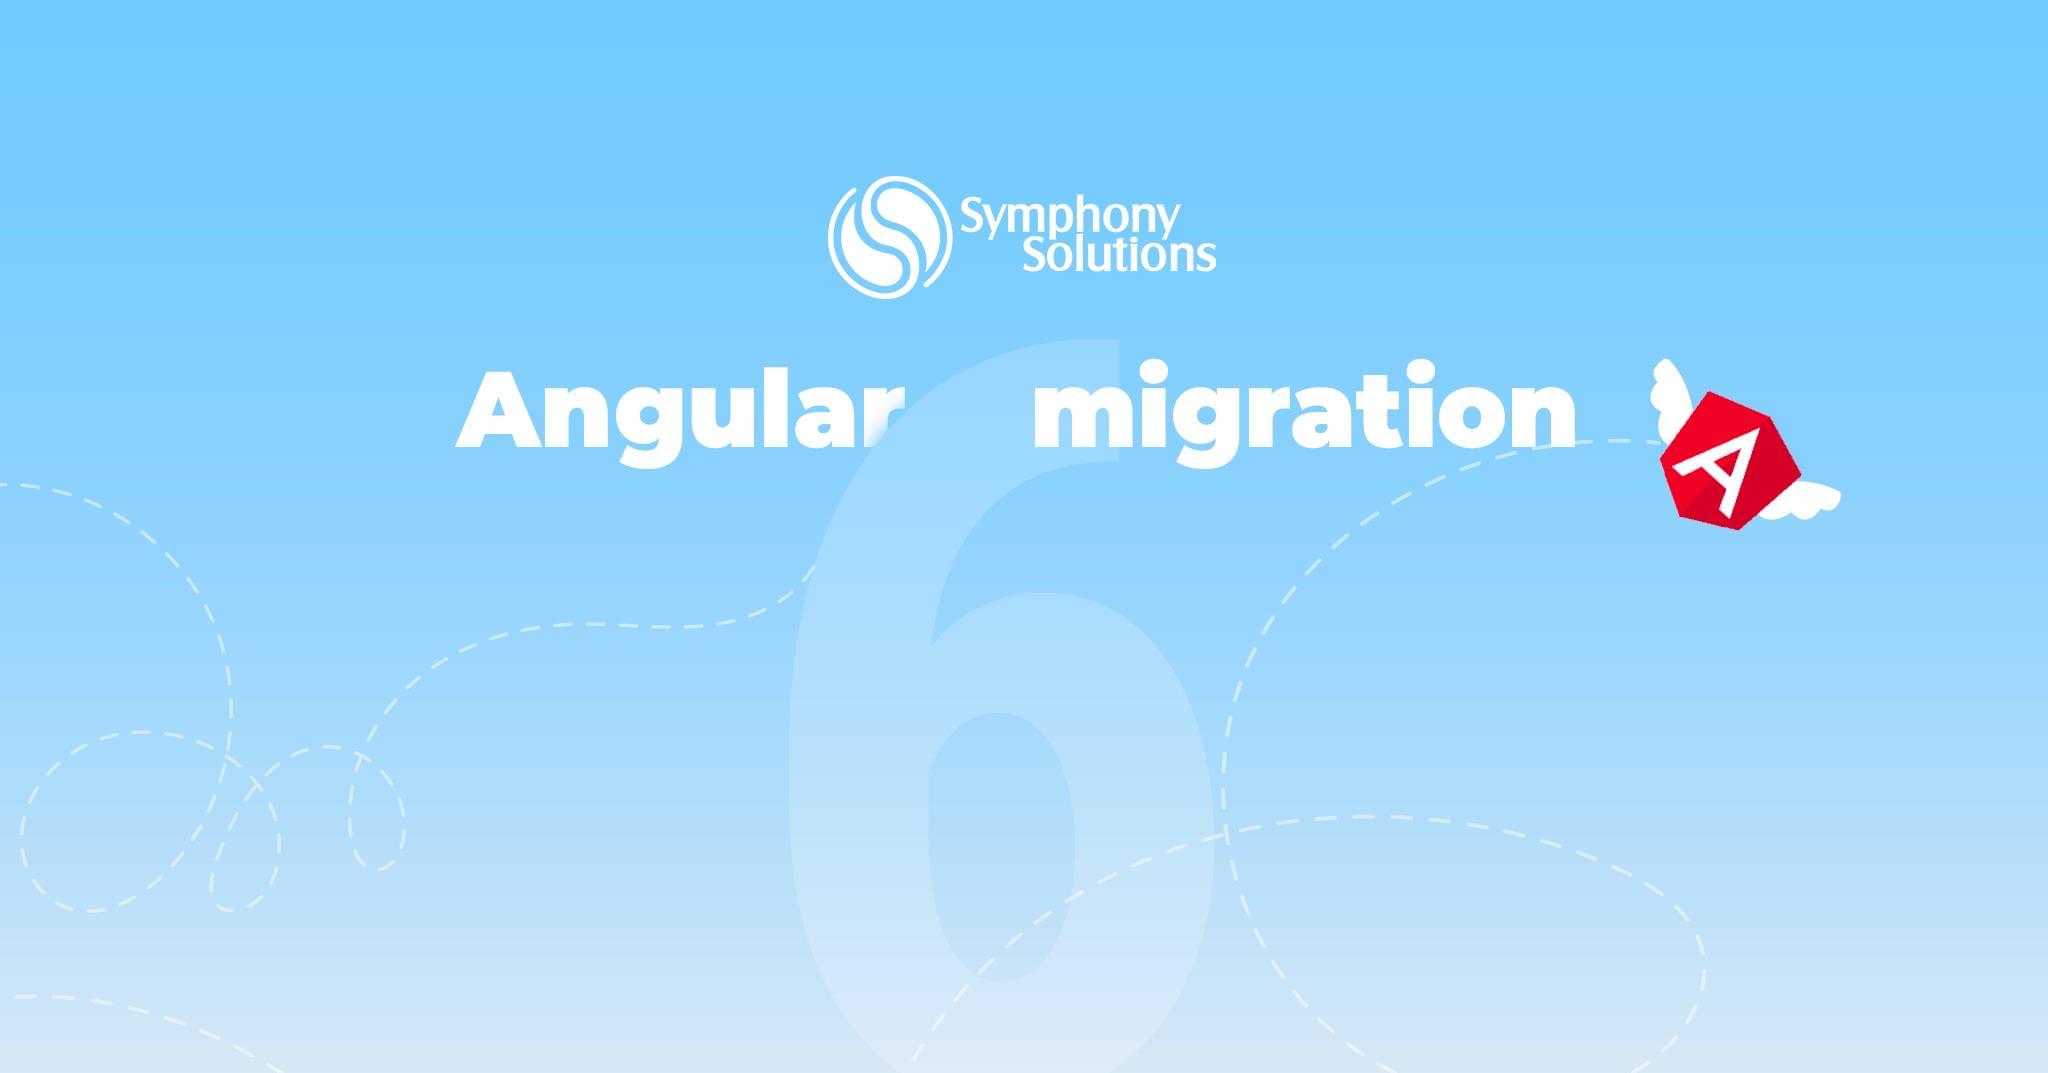 Symphony Solutions’ Largest Client Upgrades to Angular 6